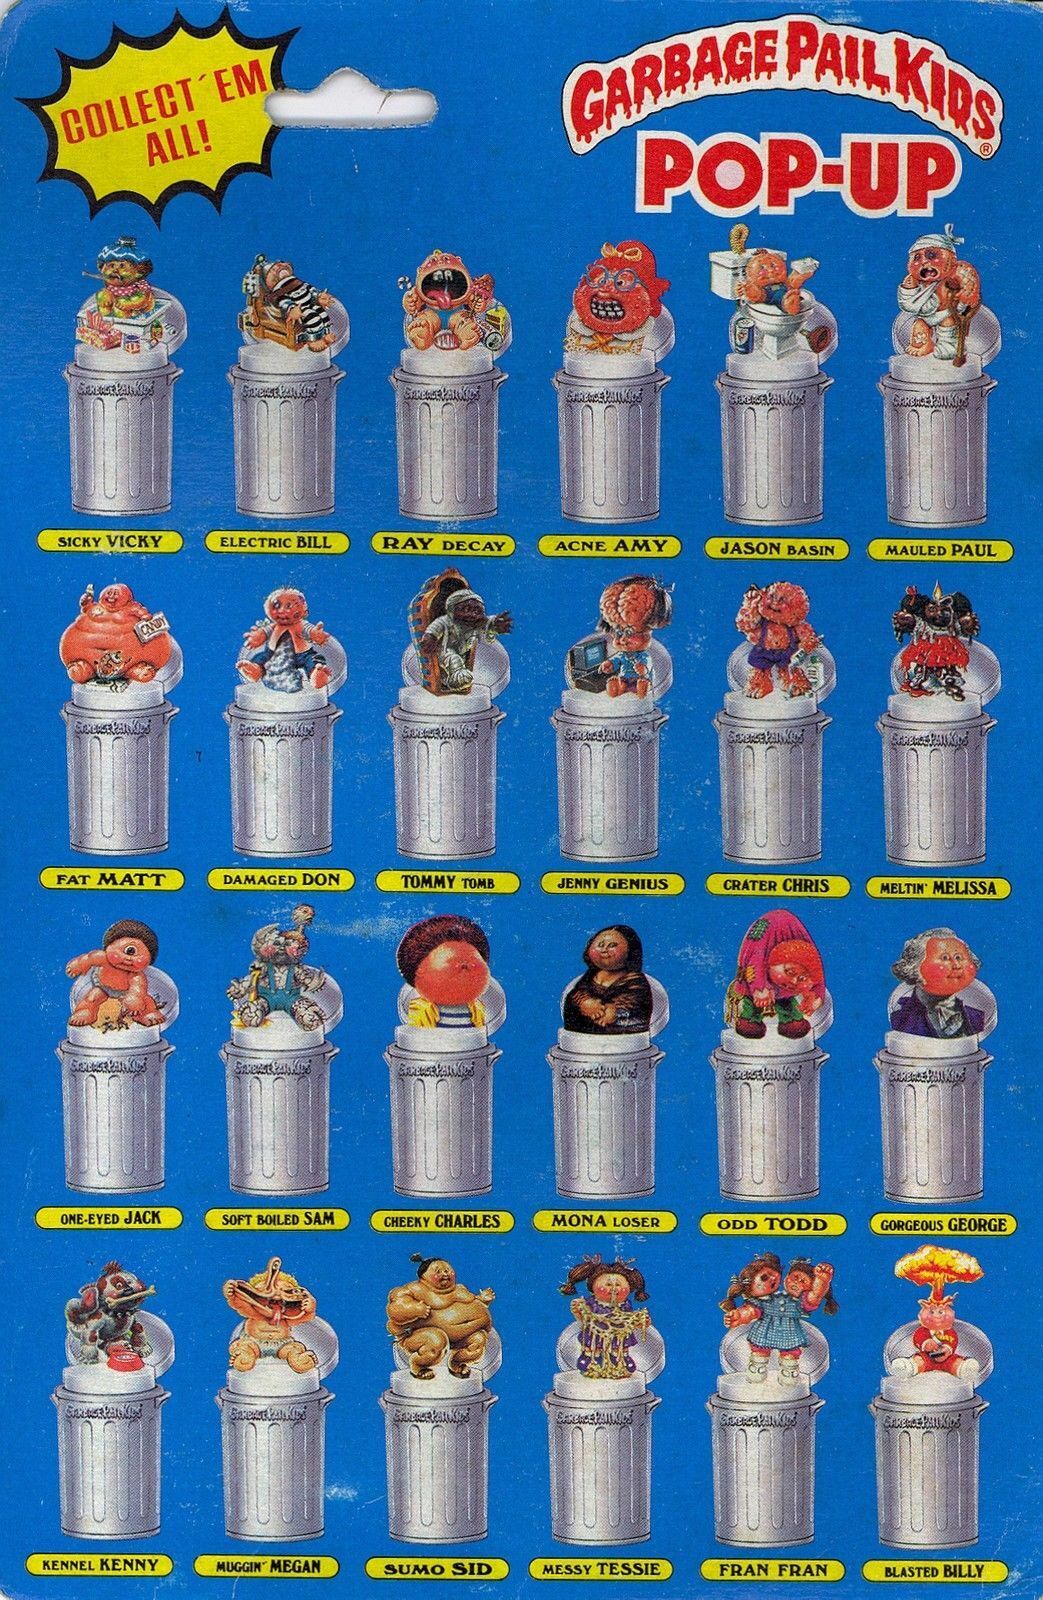 1985 Topps Imperial Toys GARBAGE PAIL KIDS TOMMY TOMB Pop-Up GPK Image 2